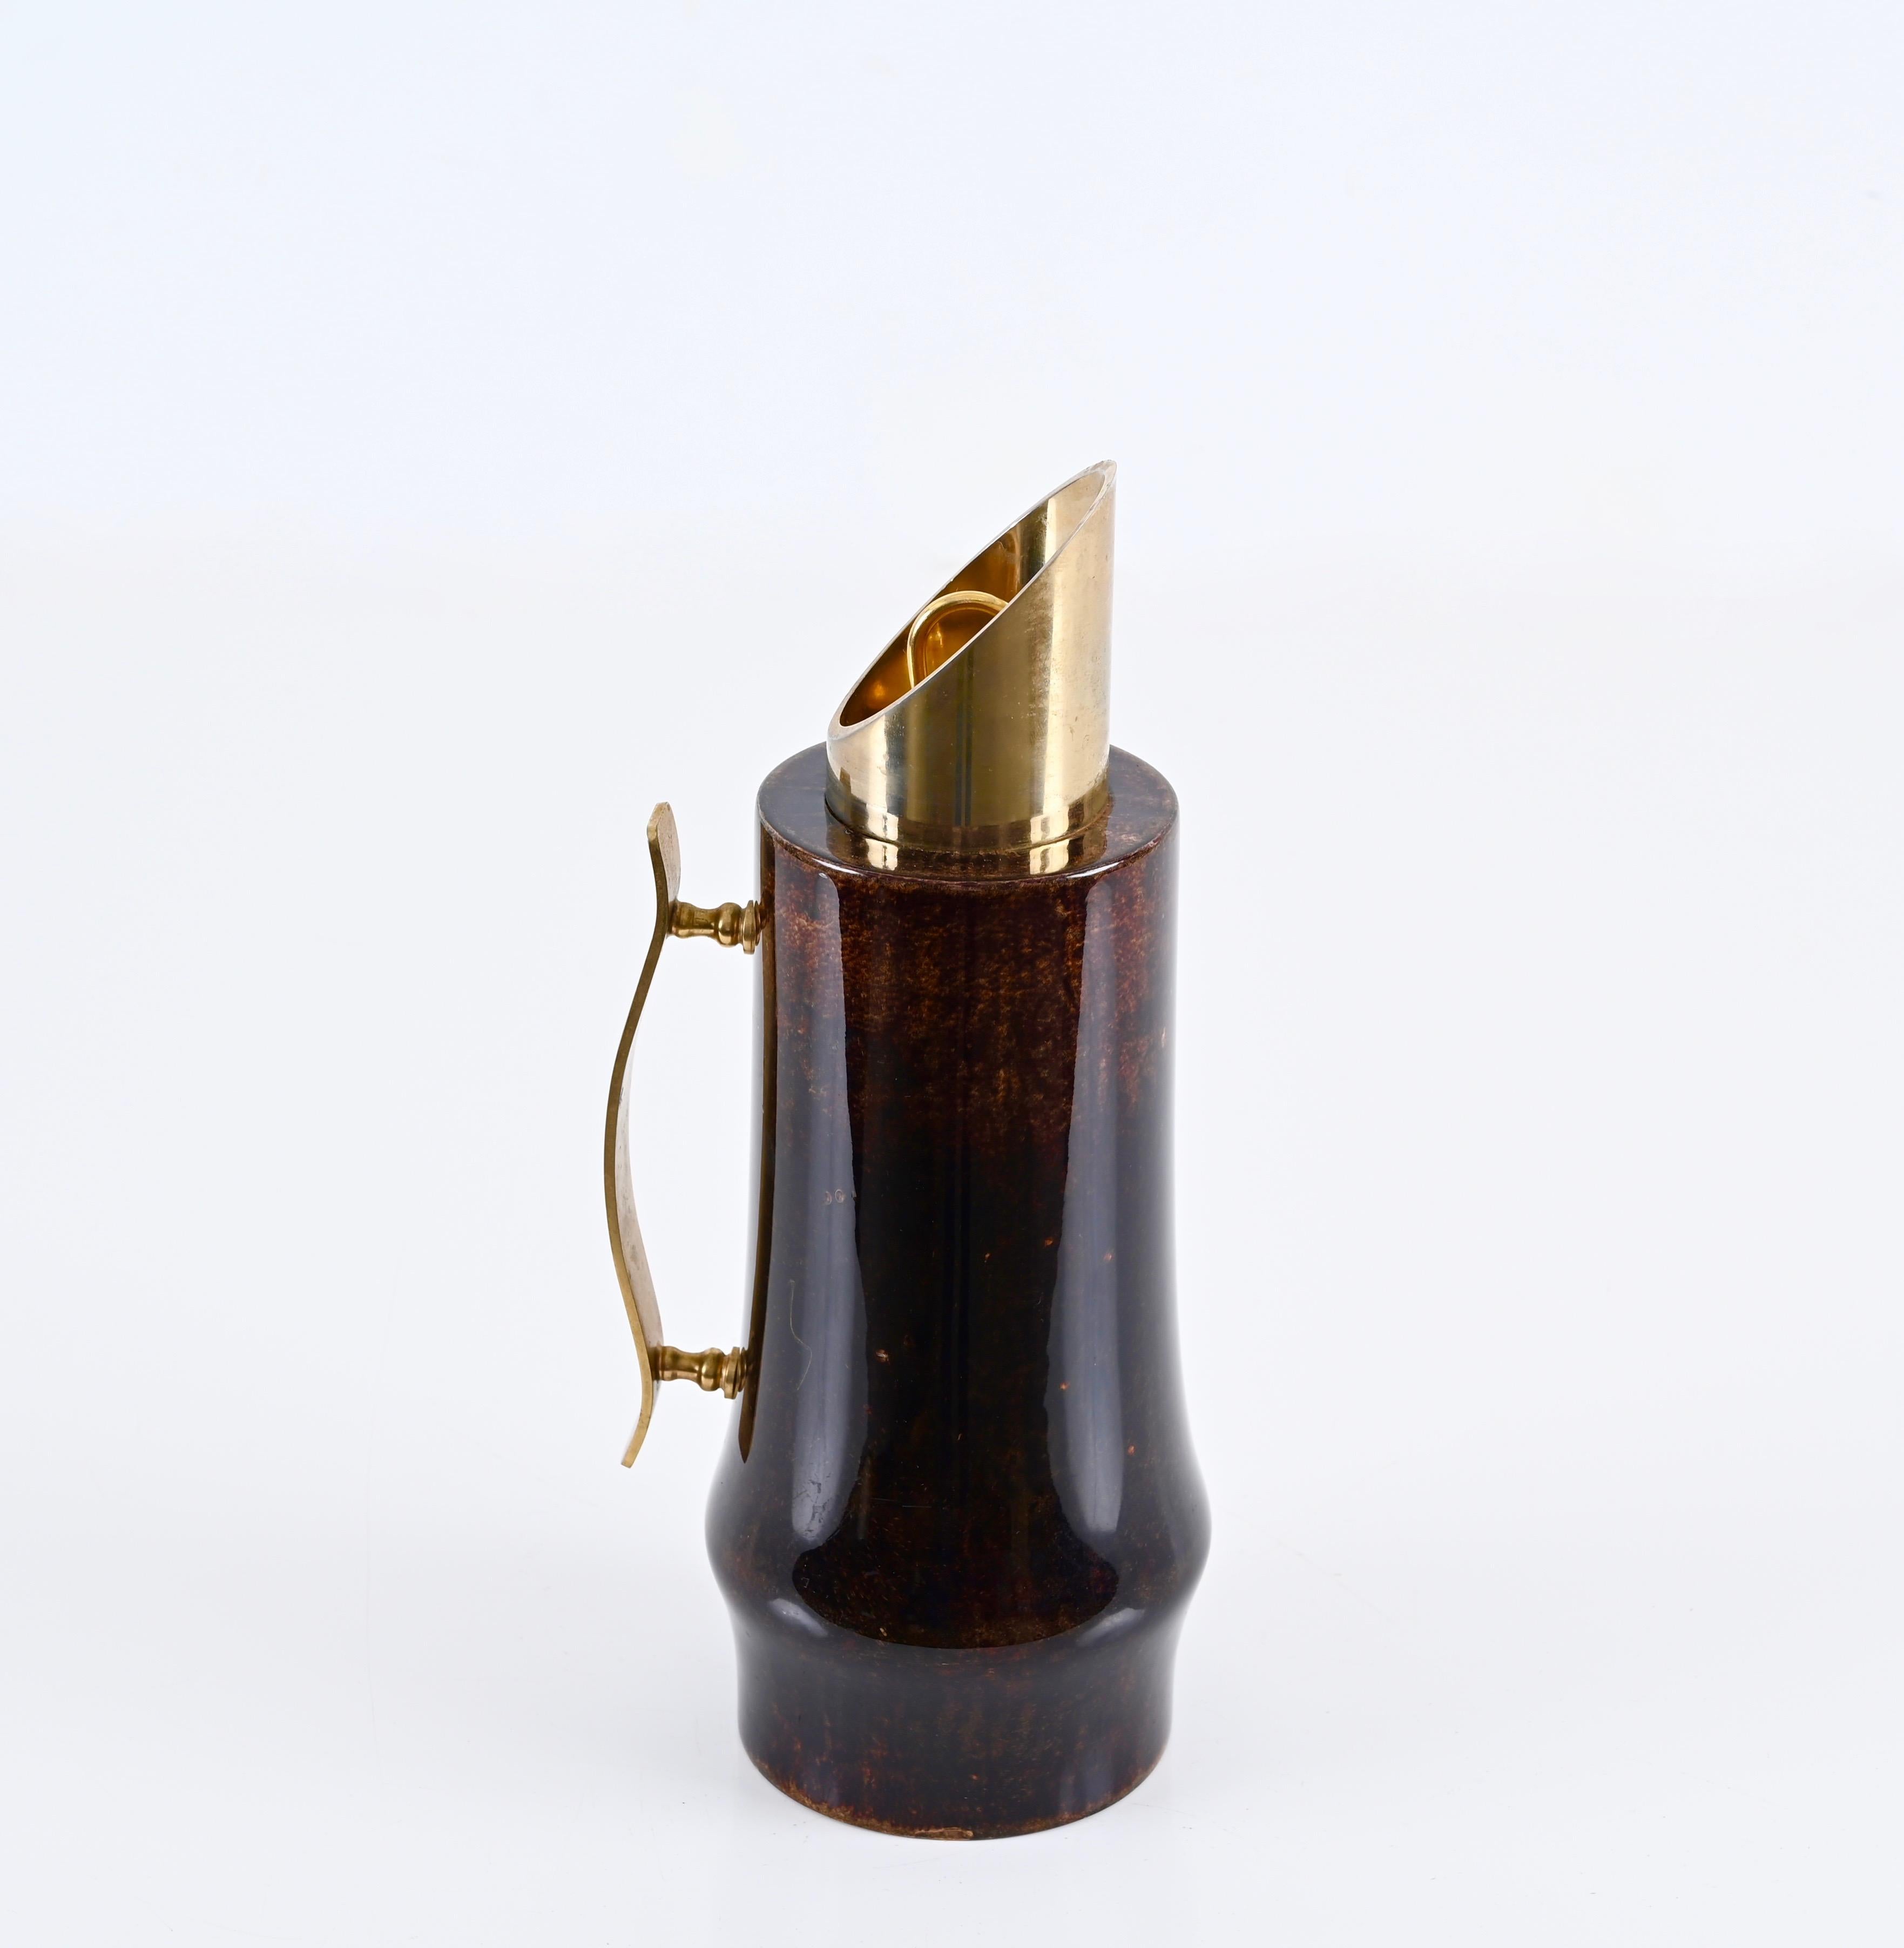 Stunning vitrified goatskin thermos decanter with gilt brass trim. Aldo Tura designed this wonderful item in Milan, Italy, during the 1950s for a Macabo production.

The piece shows fantastic craftsmanship as the inner and insulating element is